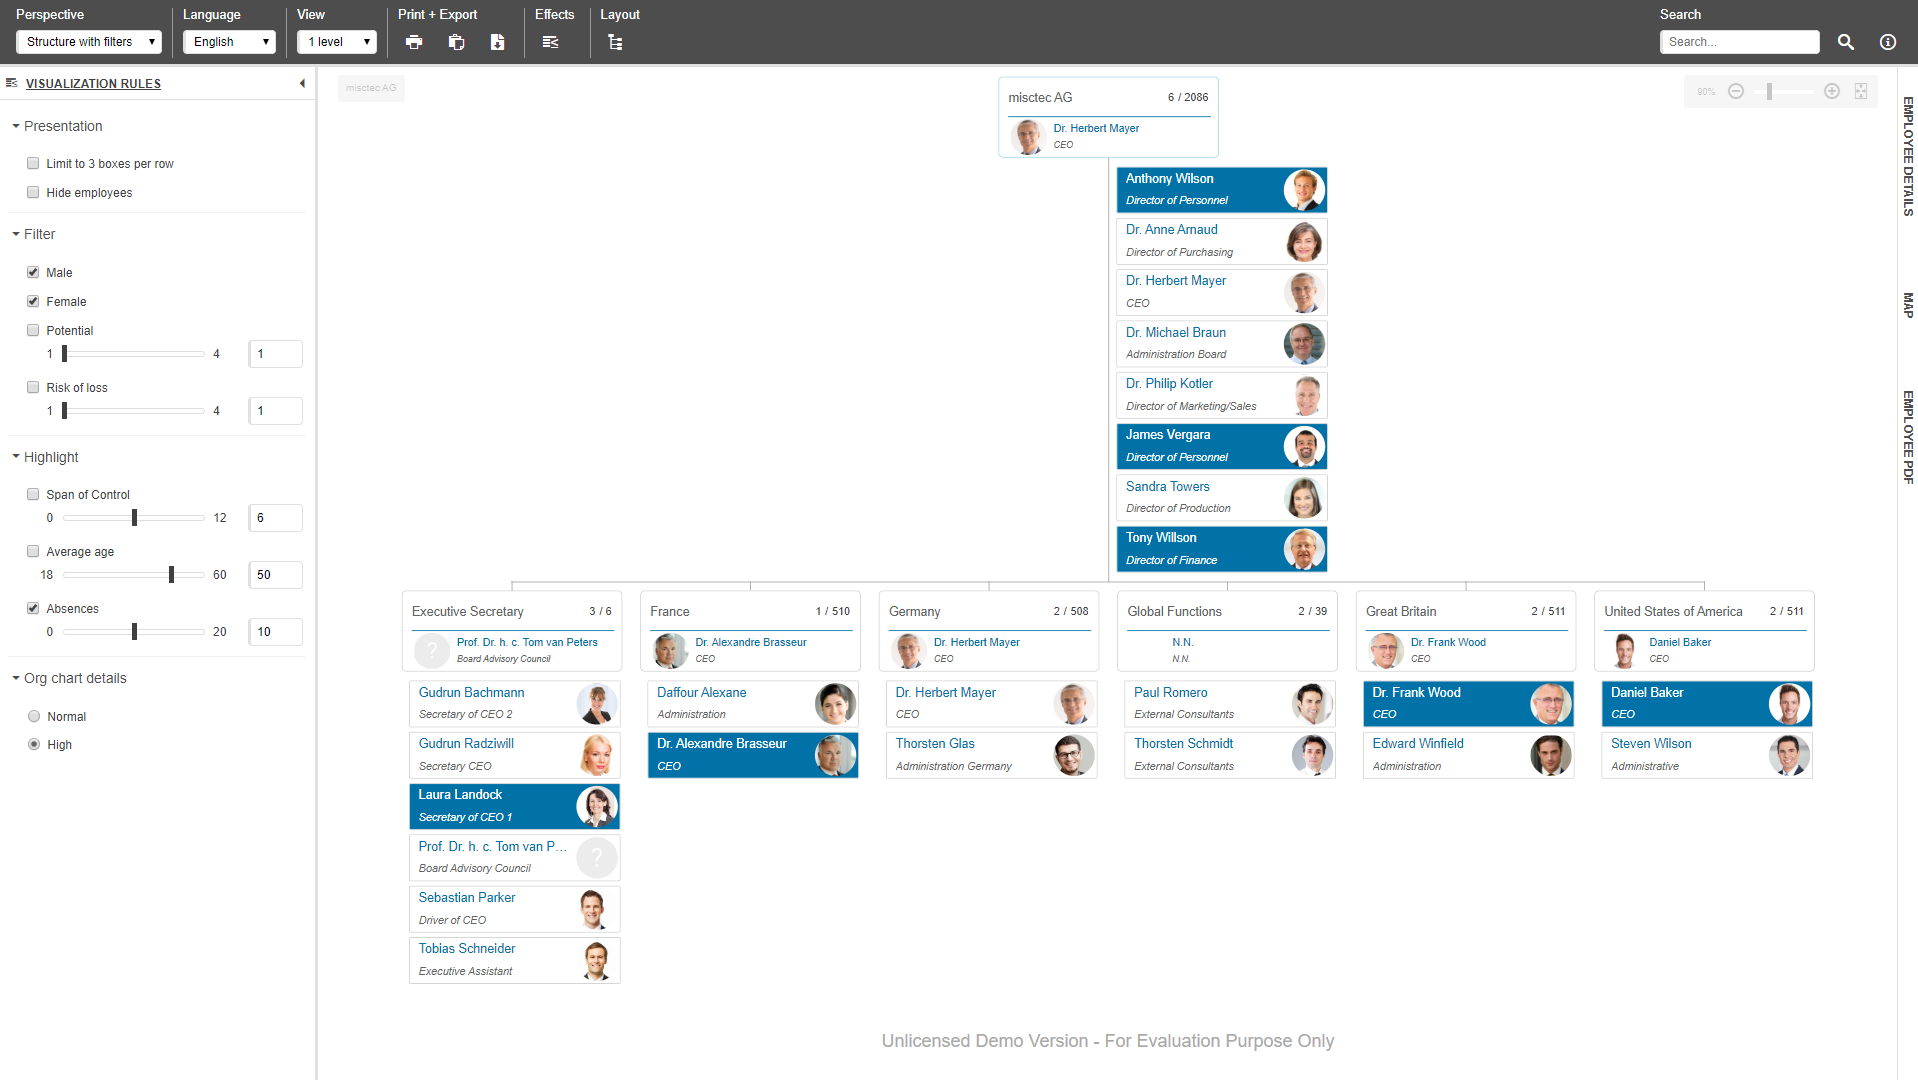 Ingentis org.manager Software - Individual visualization rules allow for a quick overview of important aspects